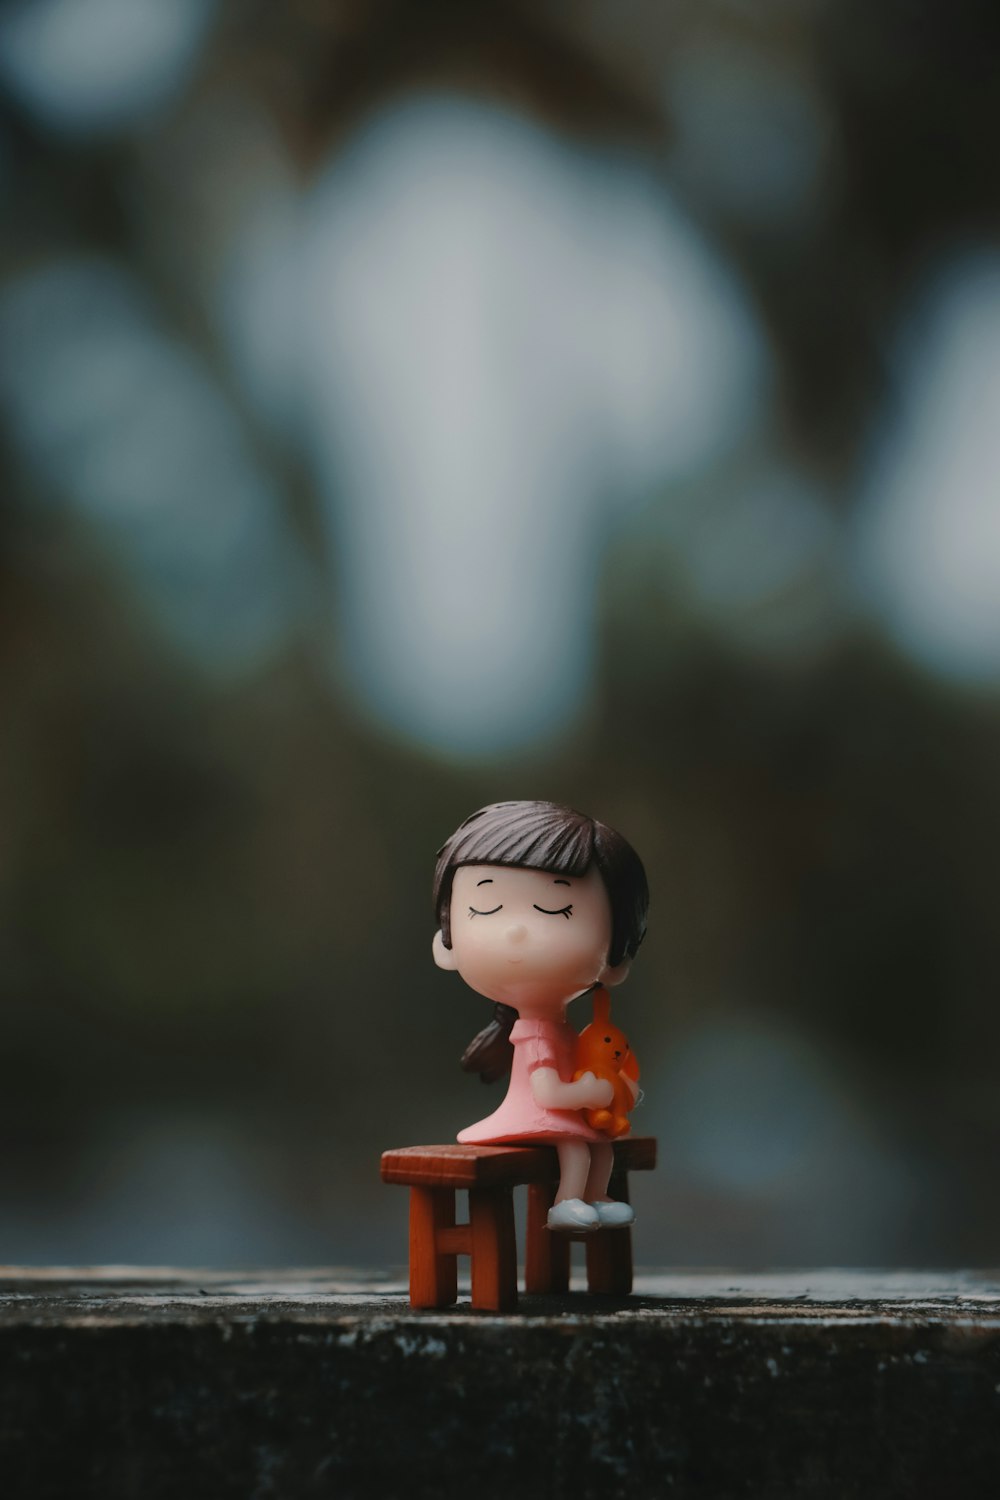 a small figurine of a girl sitting on a bench